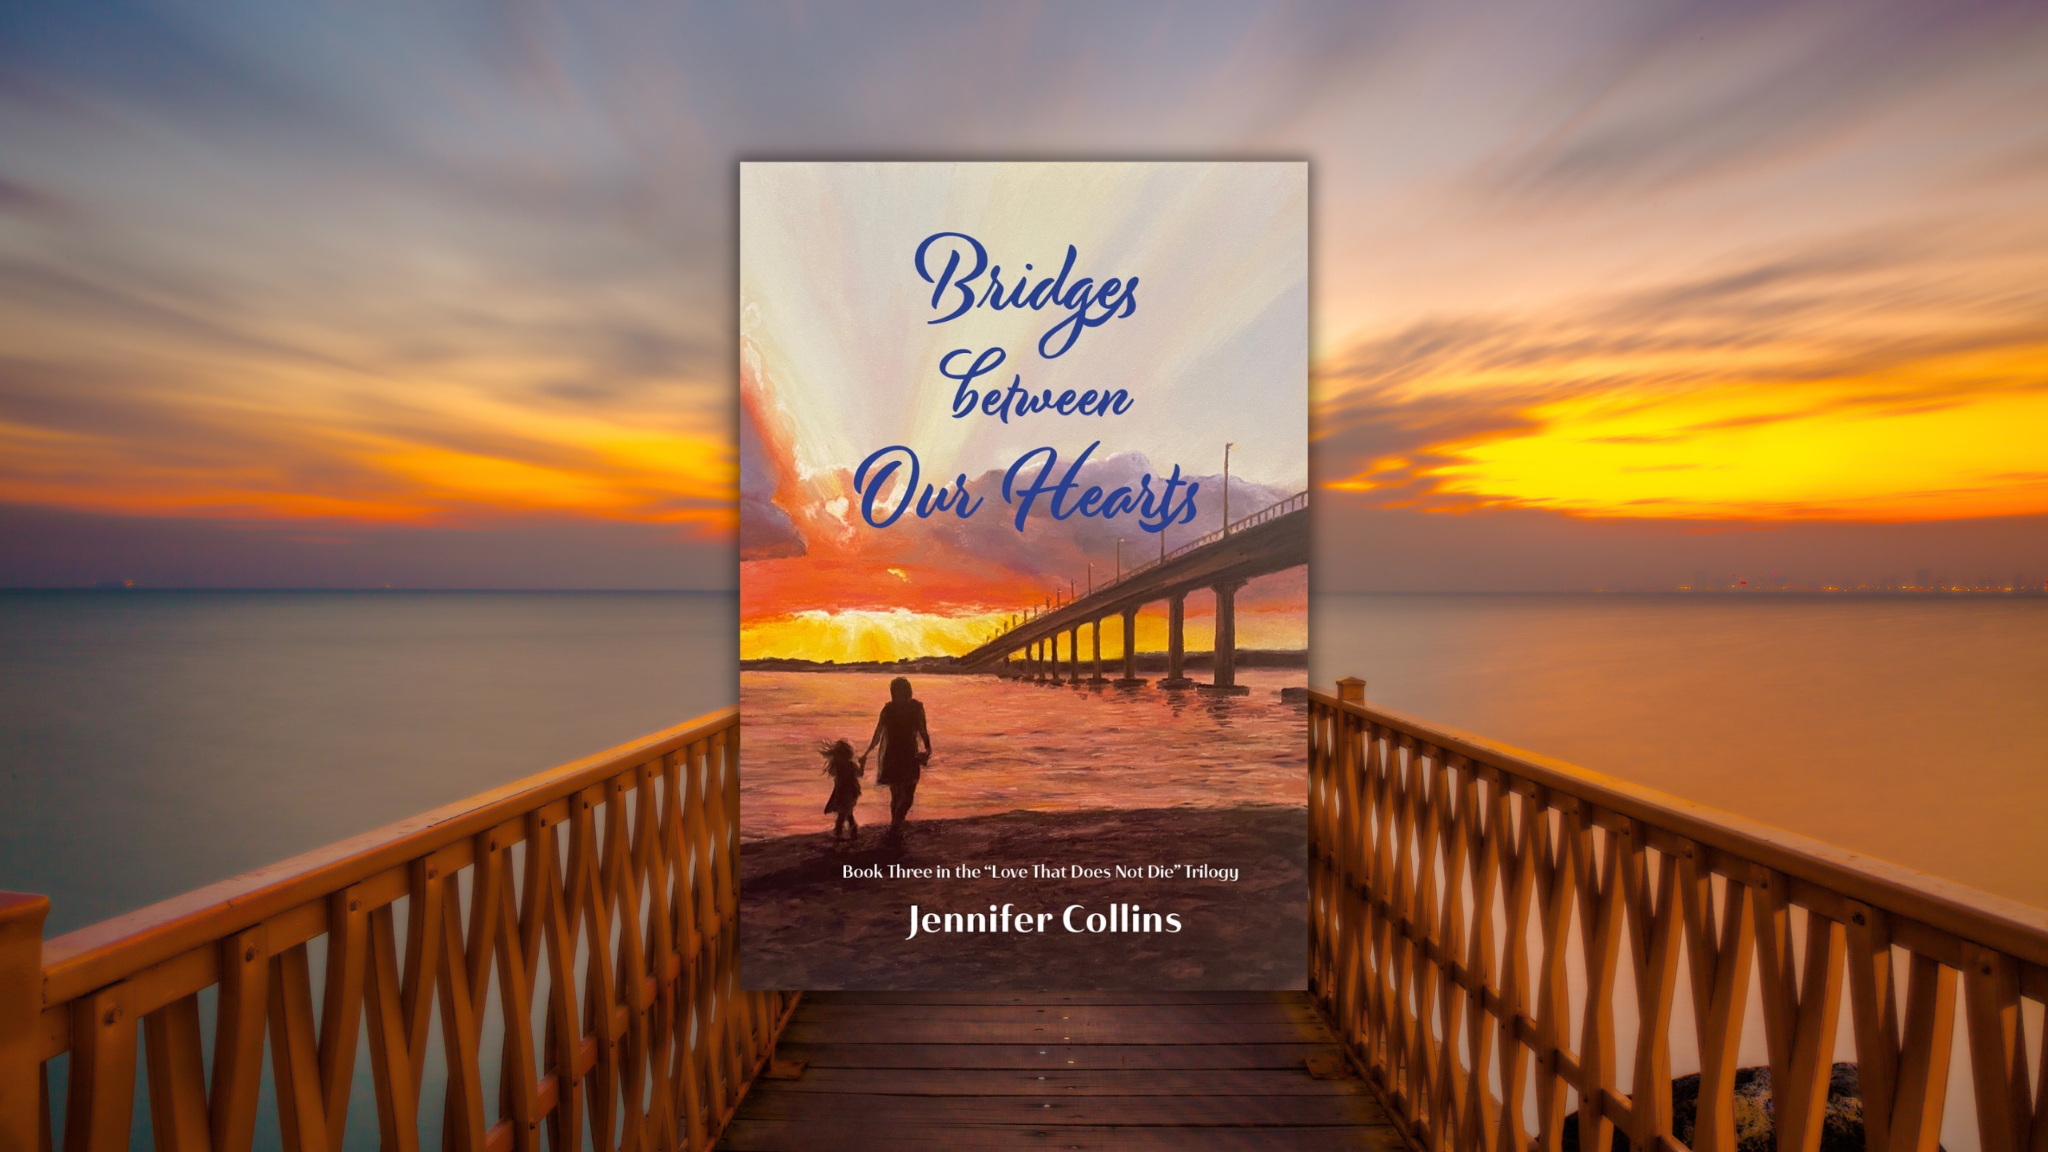 Bridge Between Our Hearts by Jennifer Collins